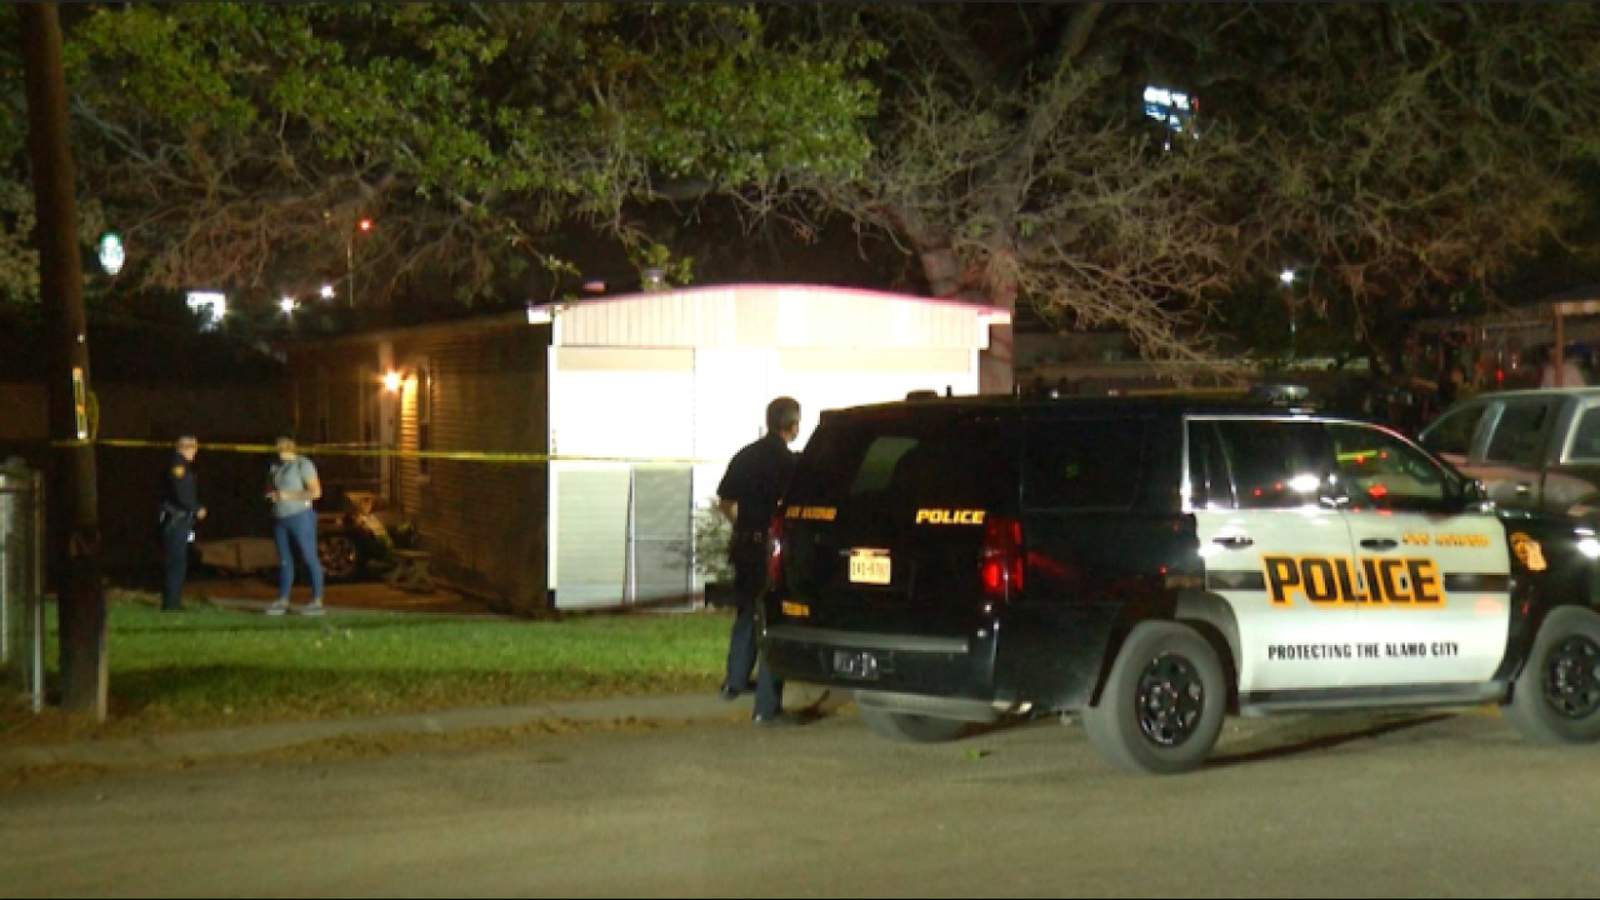 Man stabbed twice during argument at North Side mobile home park, police say